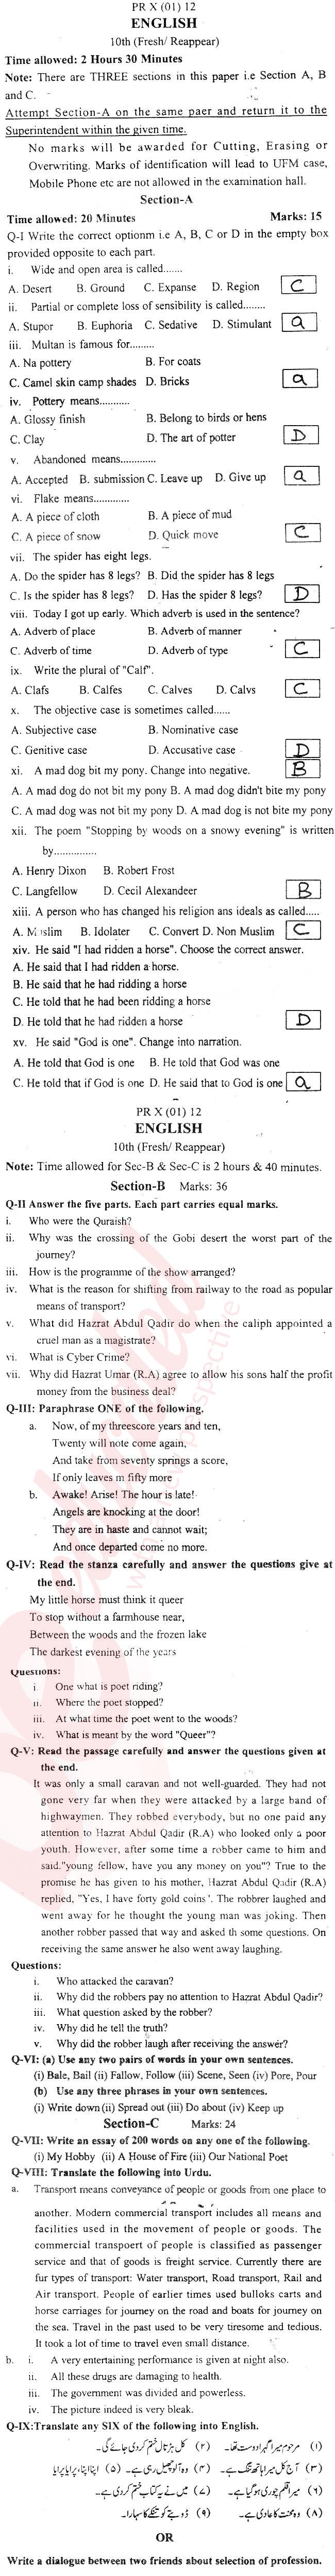 English 10th class Past Paper Group 1 BISE Swat 2012